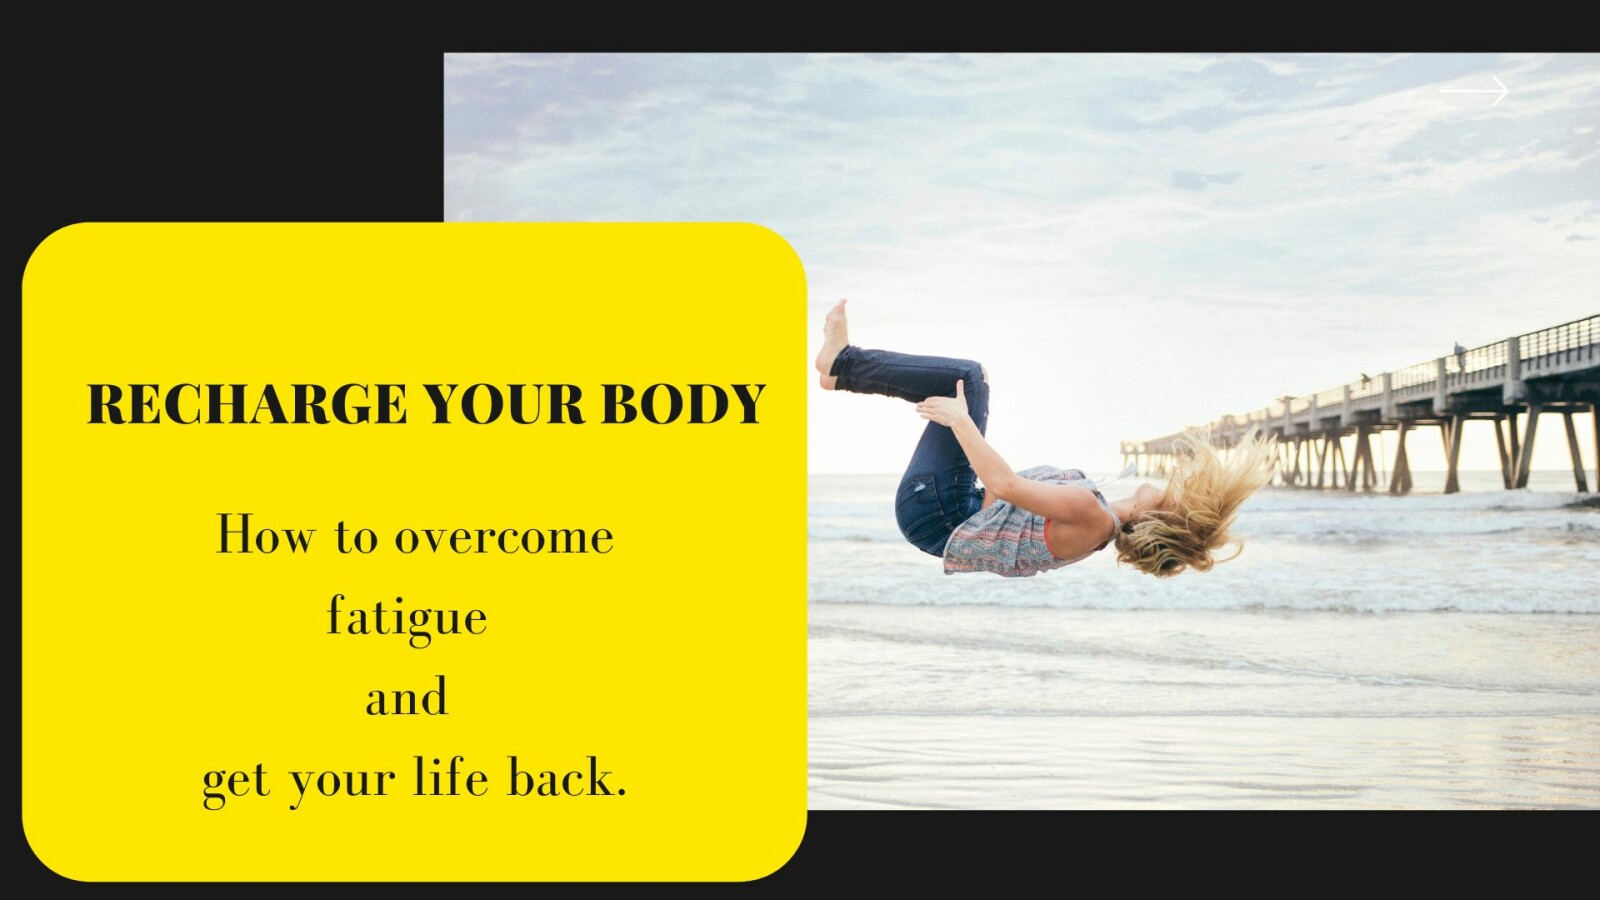 RECHARGE YOUR BODY, PART TWO